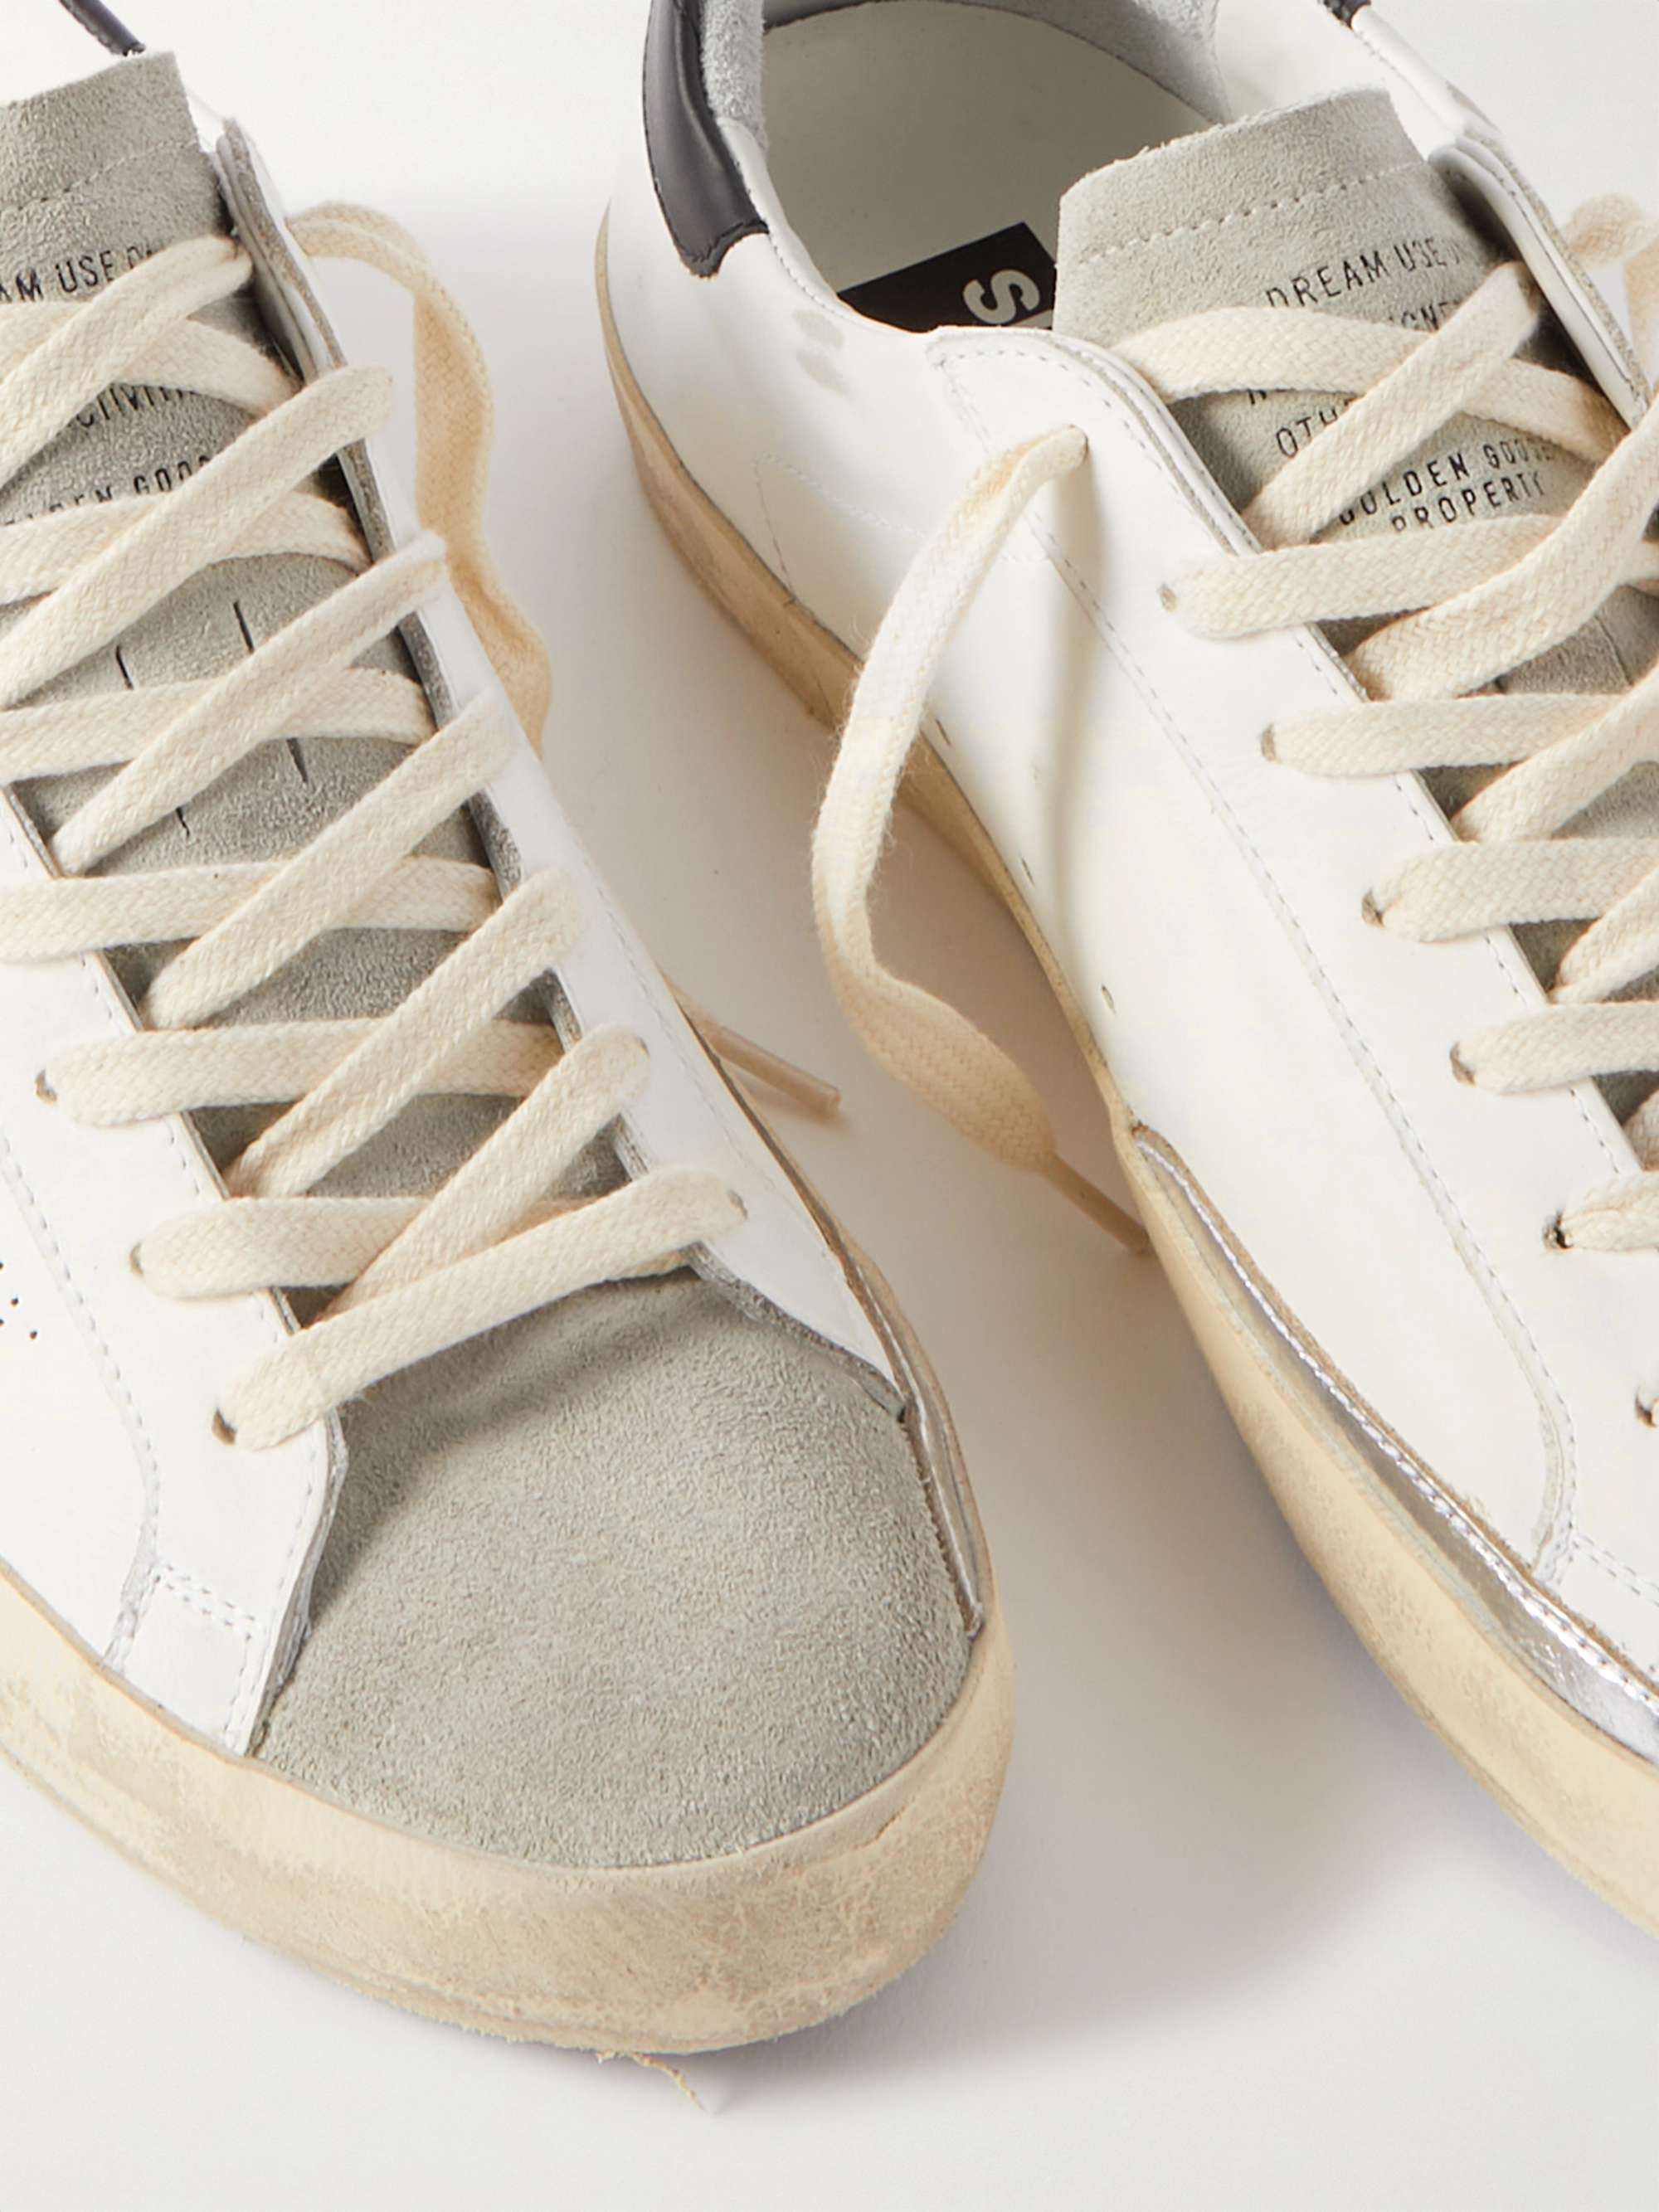 GOLDEN GOOSE DELUXE BRAND Superstar Distressed Leather and Suede Sneakers